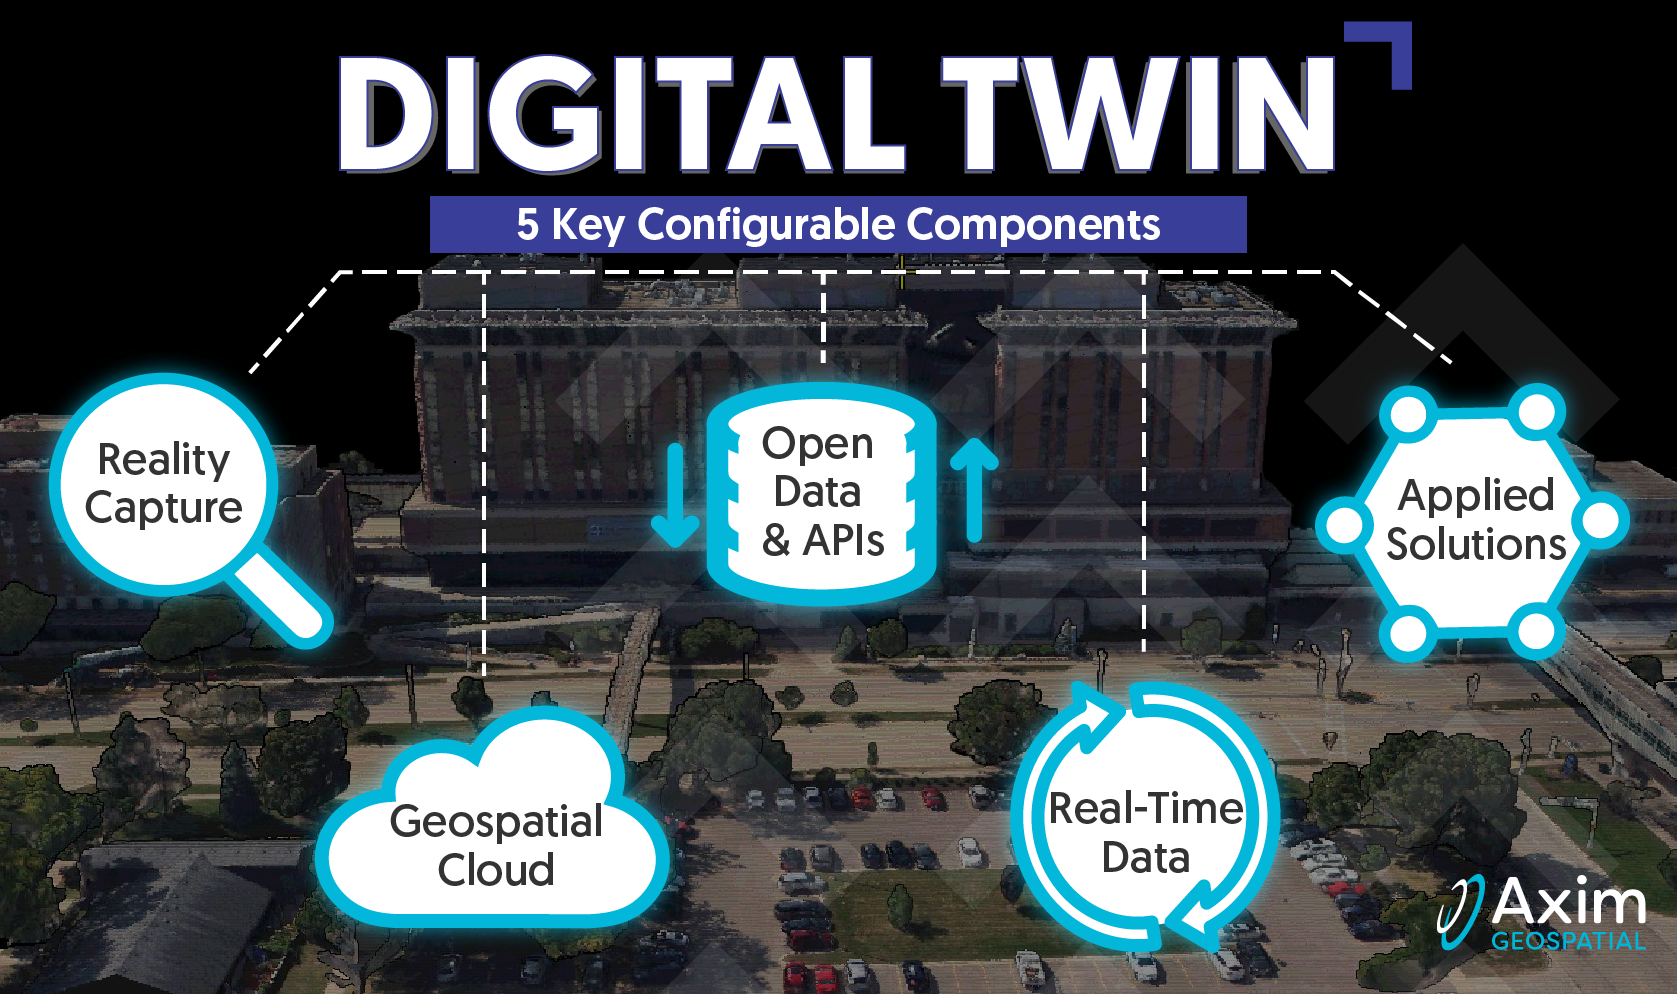 Digital Twins and Geospatial: An Introduction